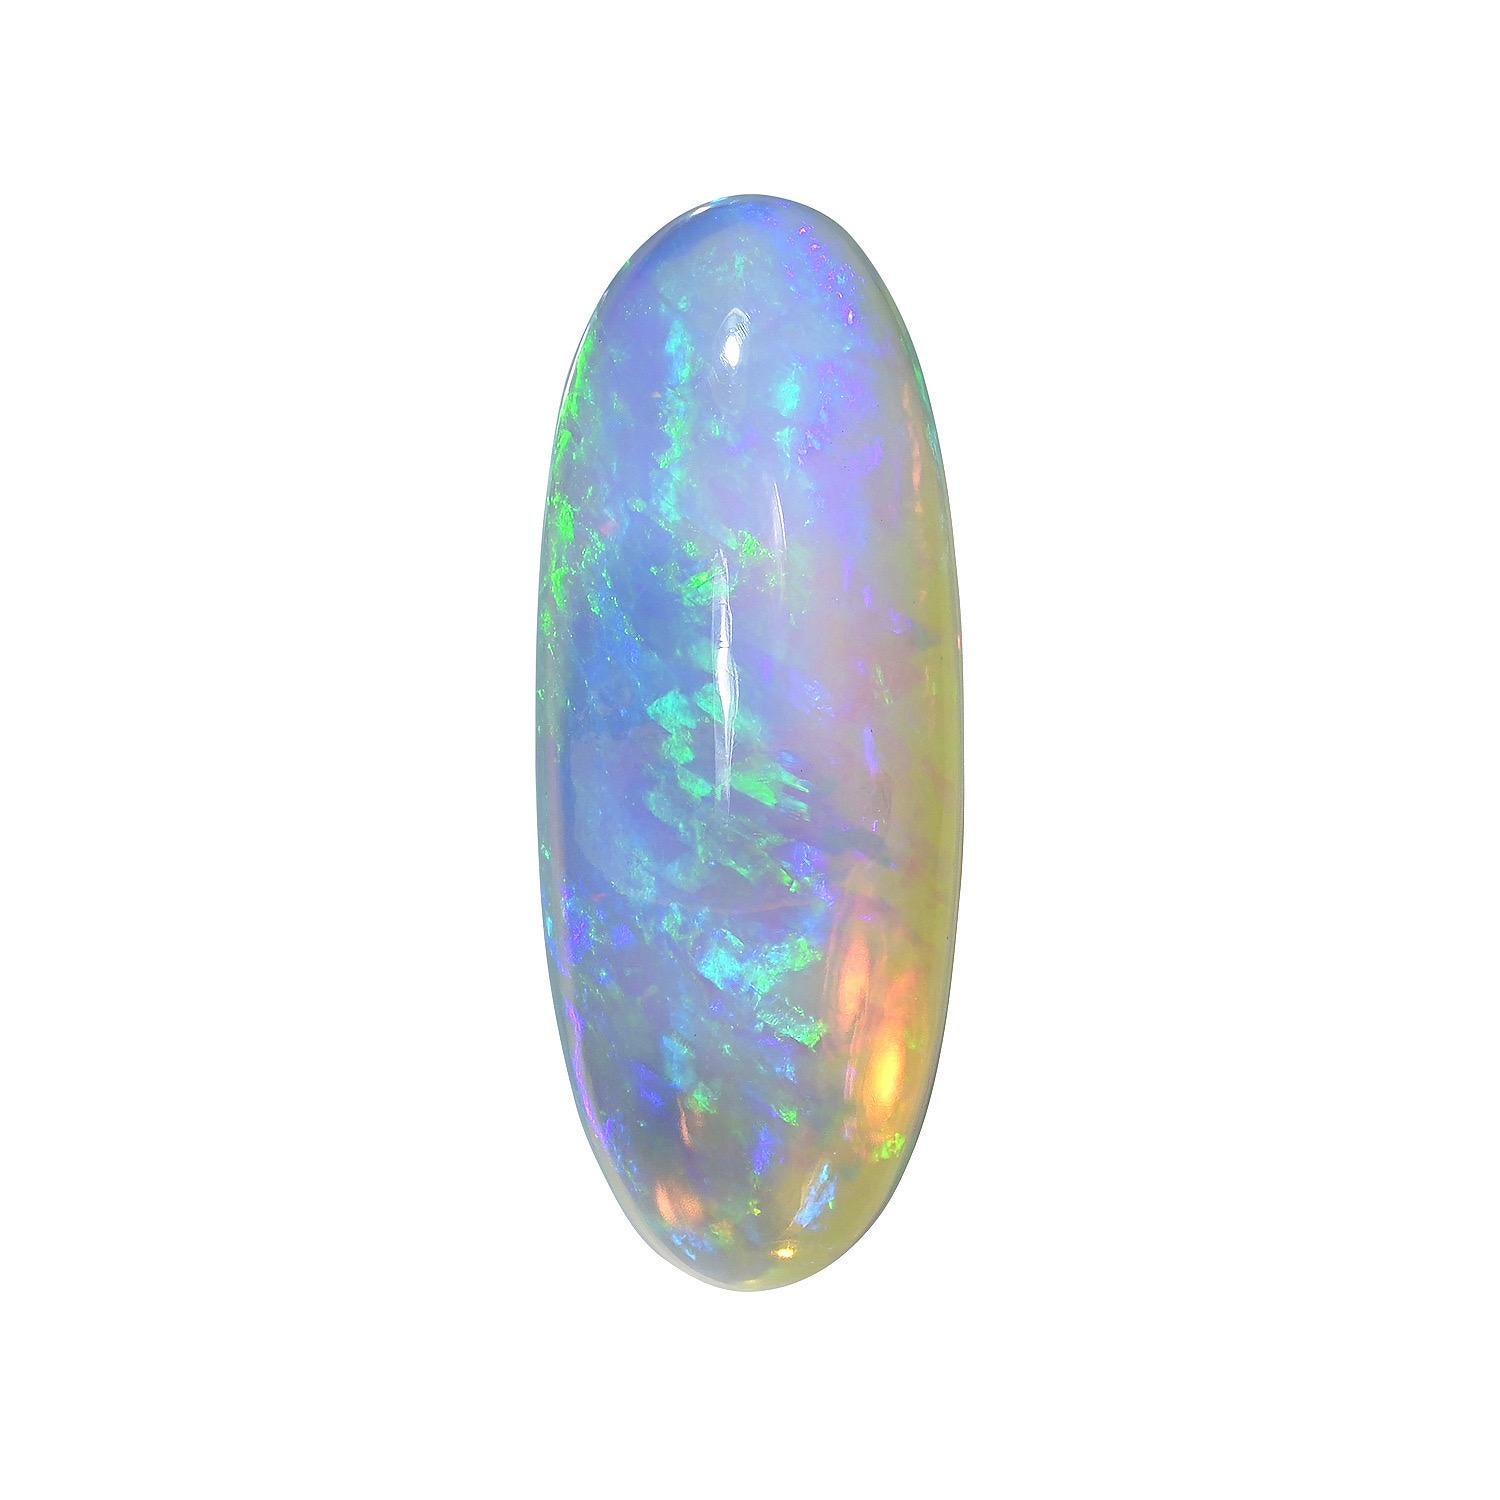 Contemporary Opal Stone 27.42 Carat Natural Ethiopian Oval loose Gemstone For Sale